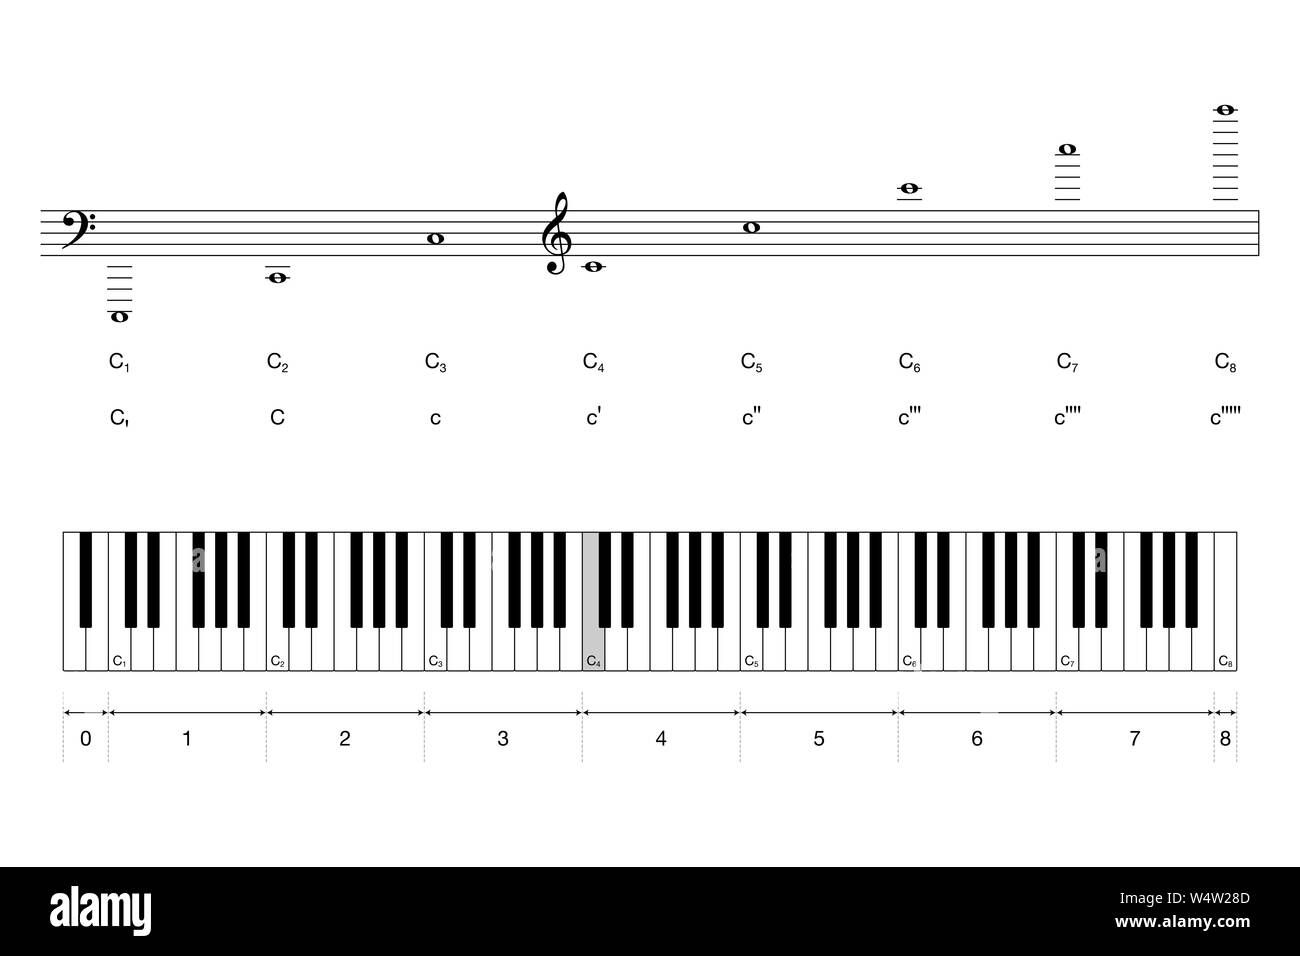 Octaves of a grand piano keyboard with scientific and Helmholtz pitch notation. Middle C is colored in gray. 88 keys and seven full octaves. Stock Photo